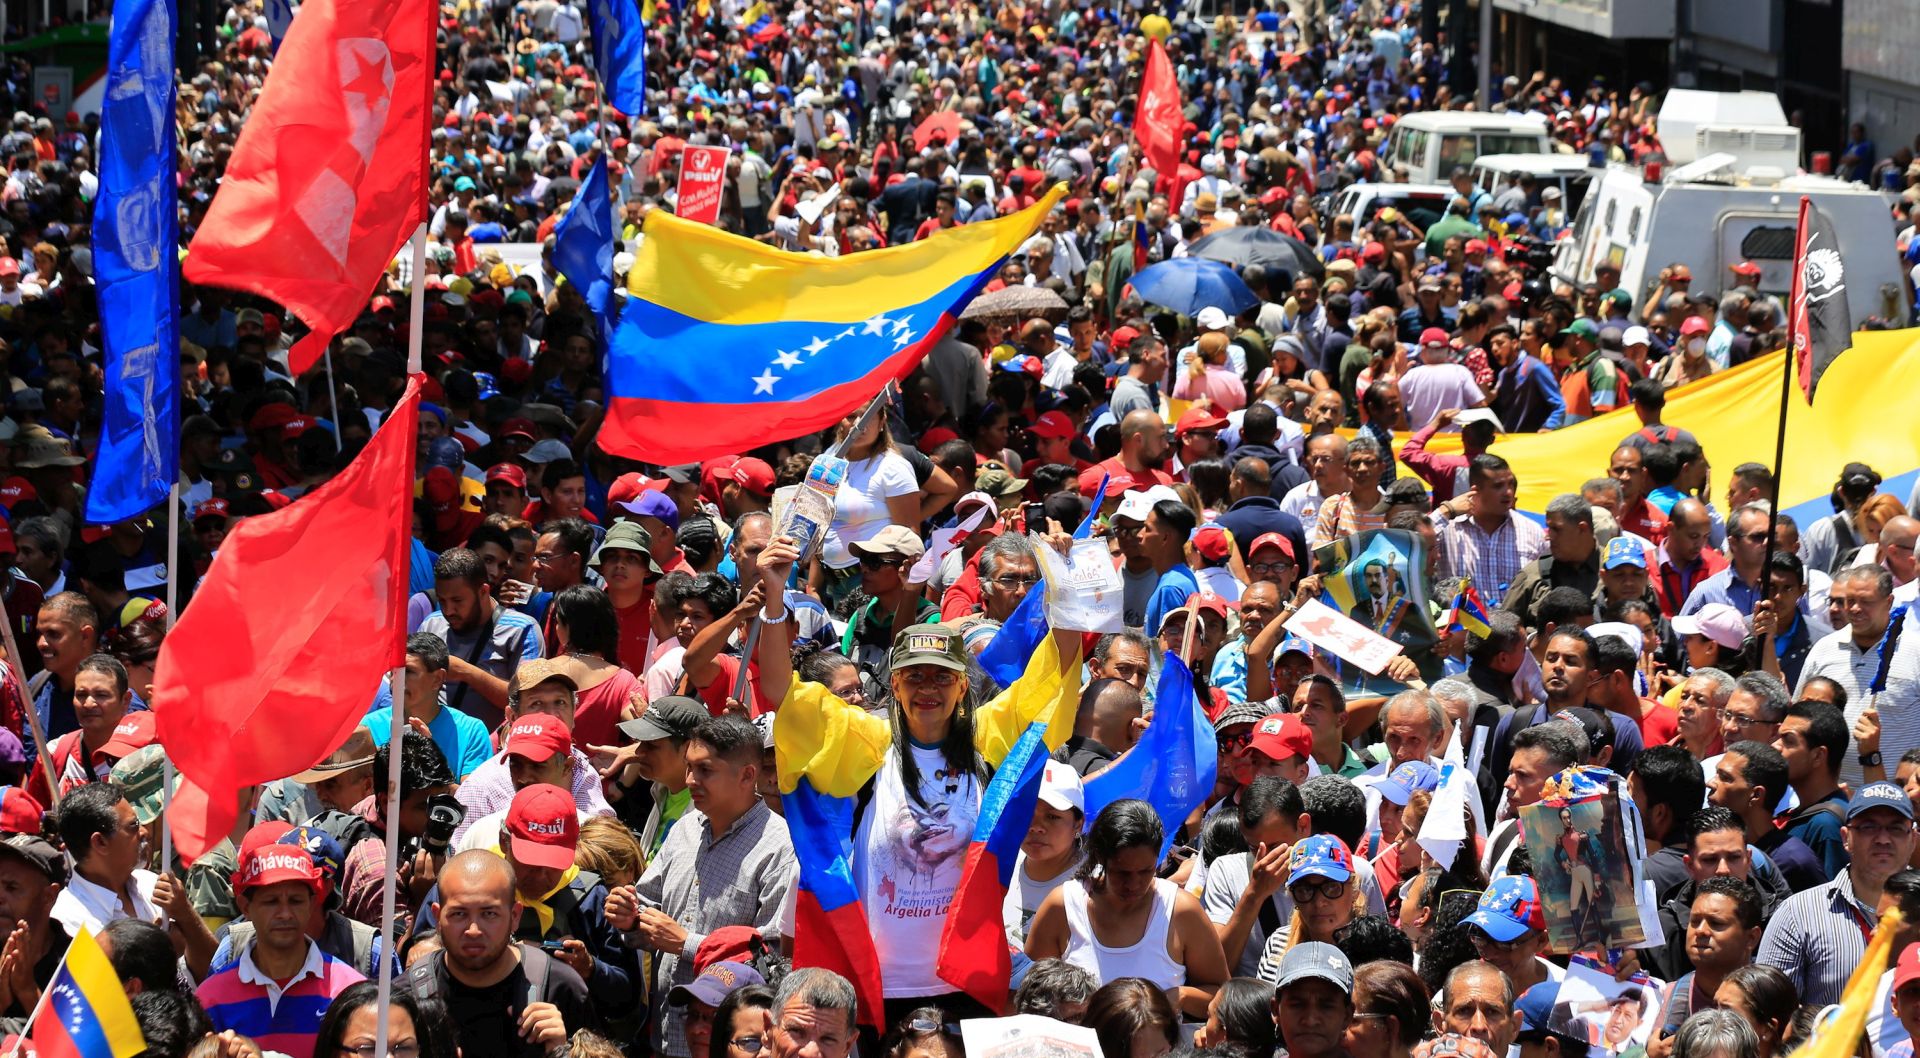 epa07539003 A handout photo made available by Miraflores press shows supporters of Venezuelan President Nicolas Maduro as they demonstrate against the president of the Parliament Juan Guaido, in Caracas, Venezuela, 30 April 2019. After some military personnel joined him, Venezuelan interim President Juan Guaido has asked supporters to take to the streets in order to end the regime of President Nicolas Maduro.  EPA/Mirfaflores Press HANDOUT  HANDOUT EDITORIAL USE ONLY/NO SALES